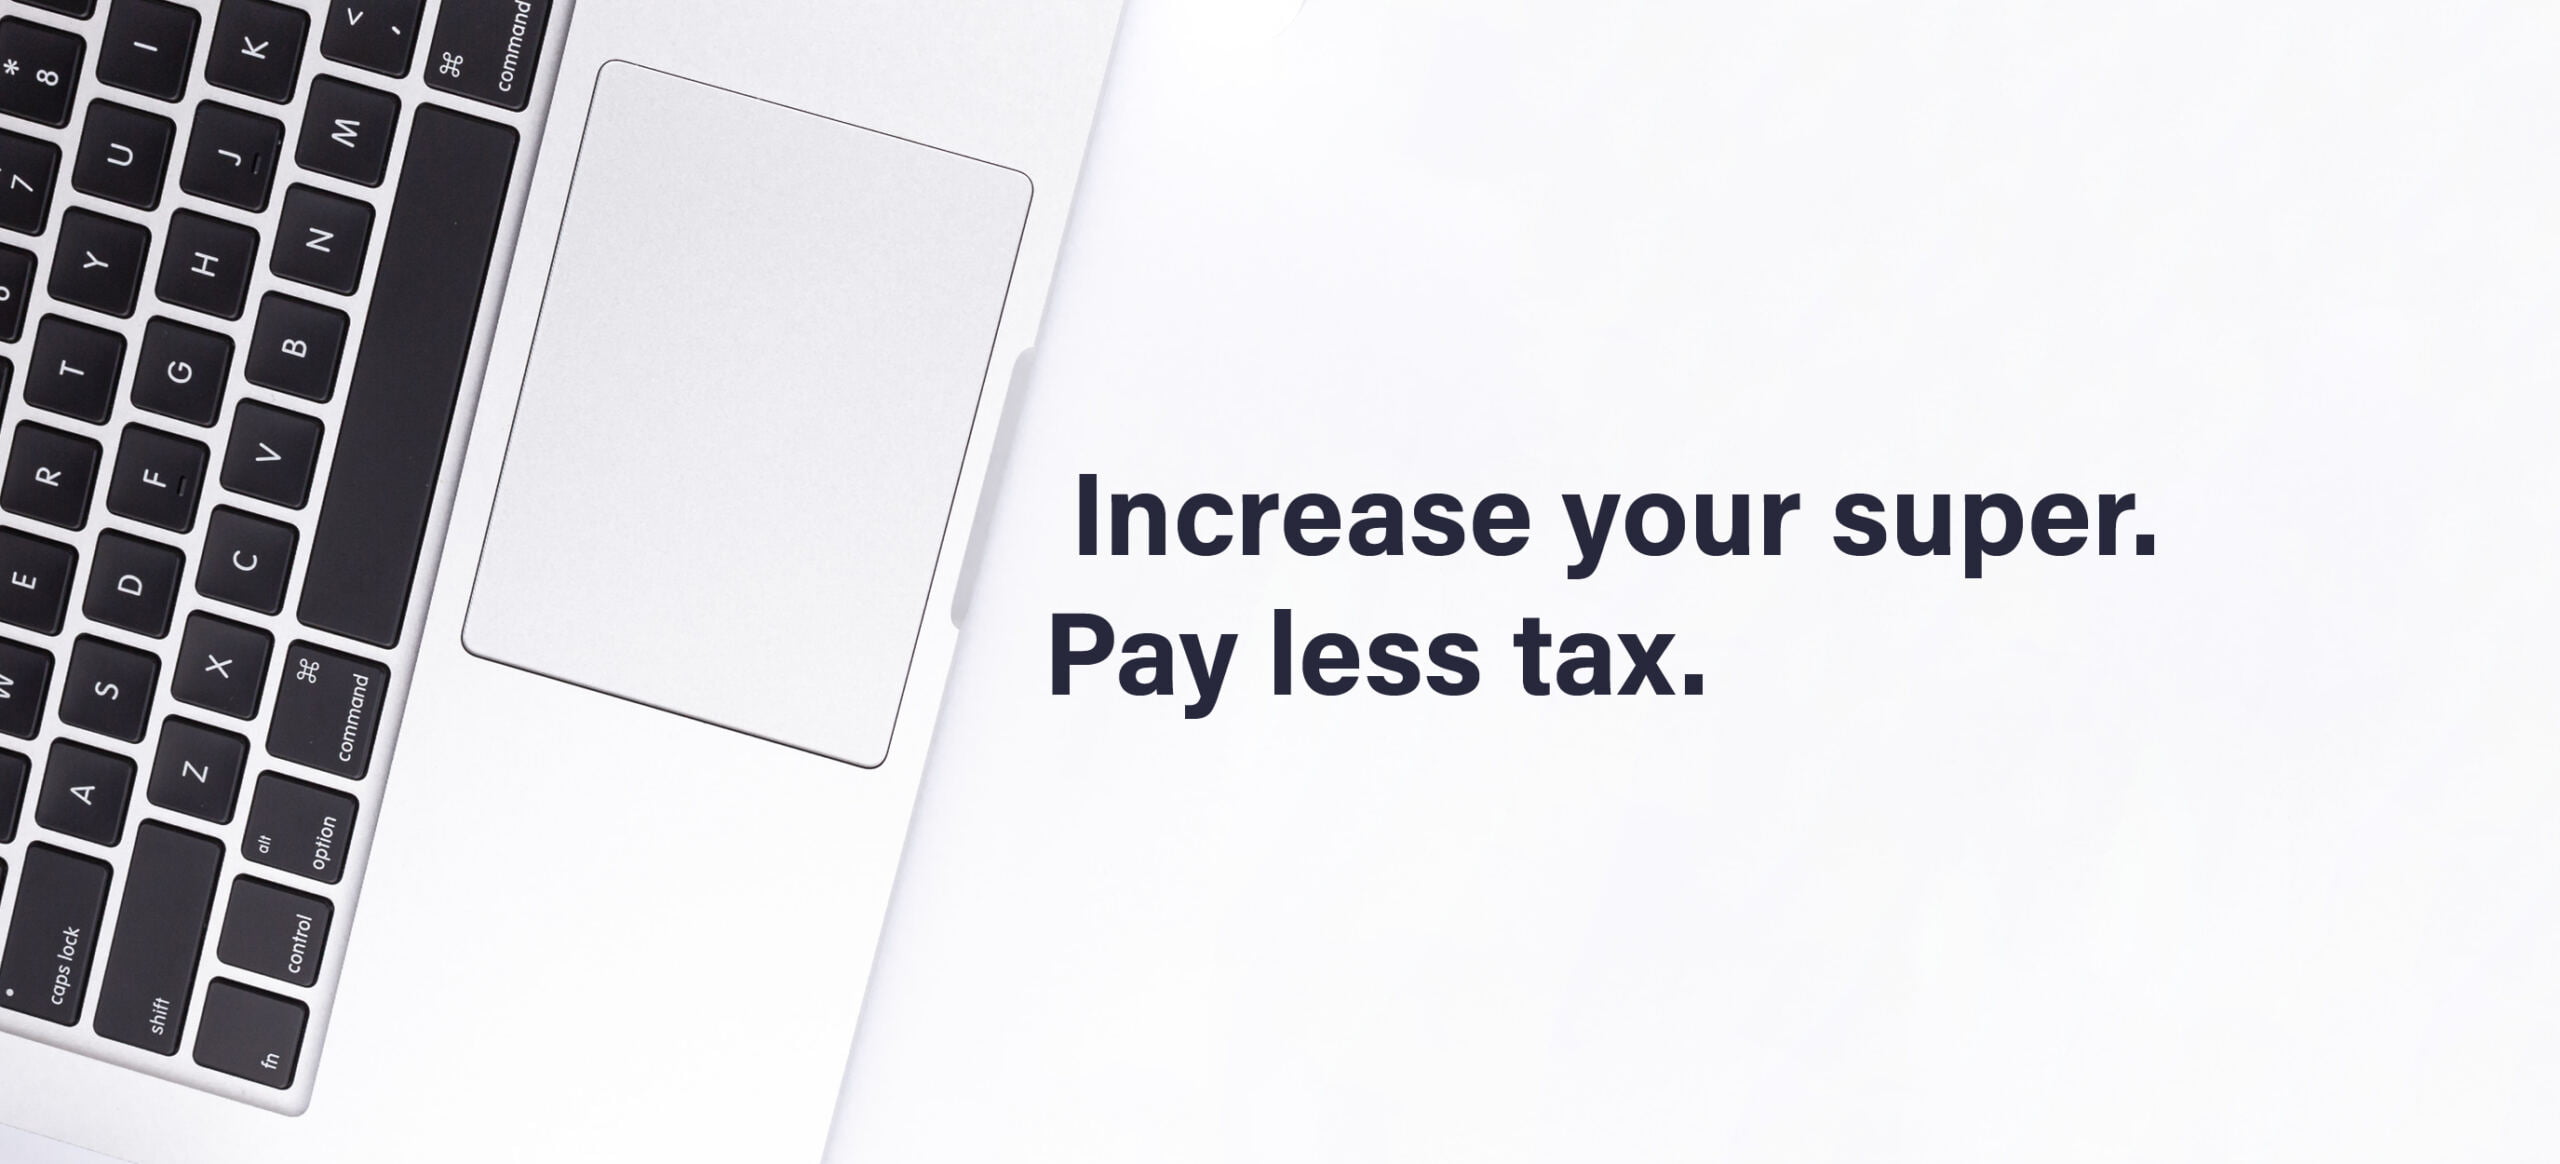 Want to Boost your Super While Saving on Tax?